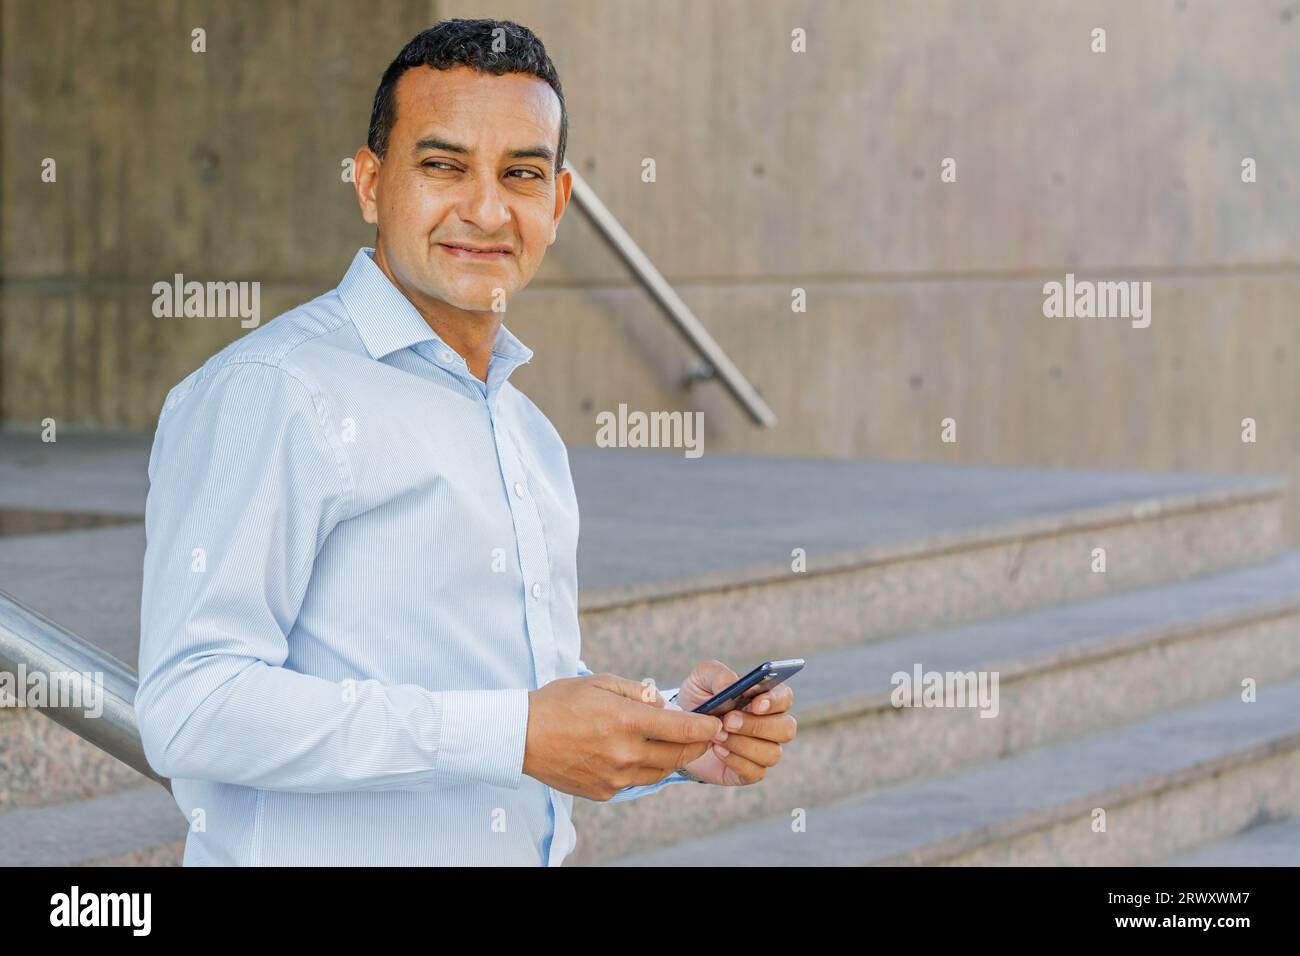 Young Latino man using a mobile phone on the stairs of a building with copy space. Stock Photo